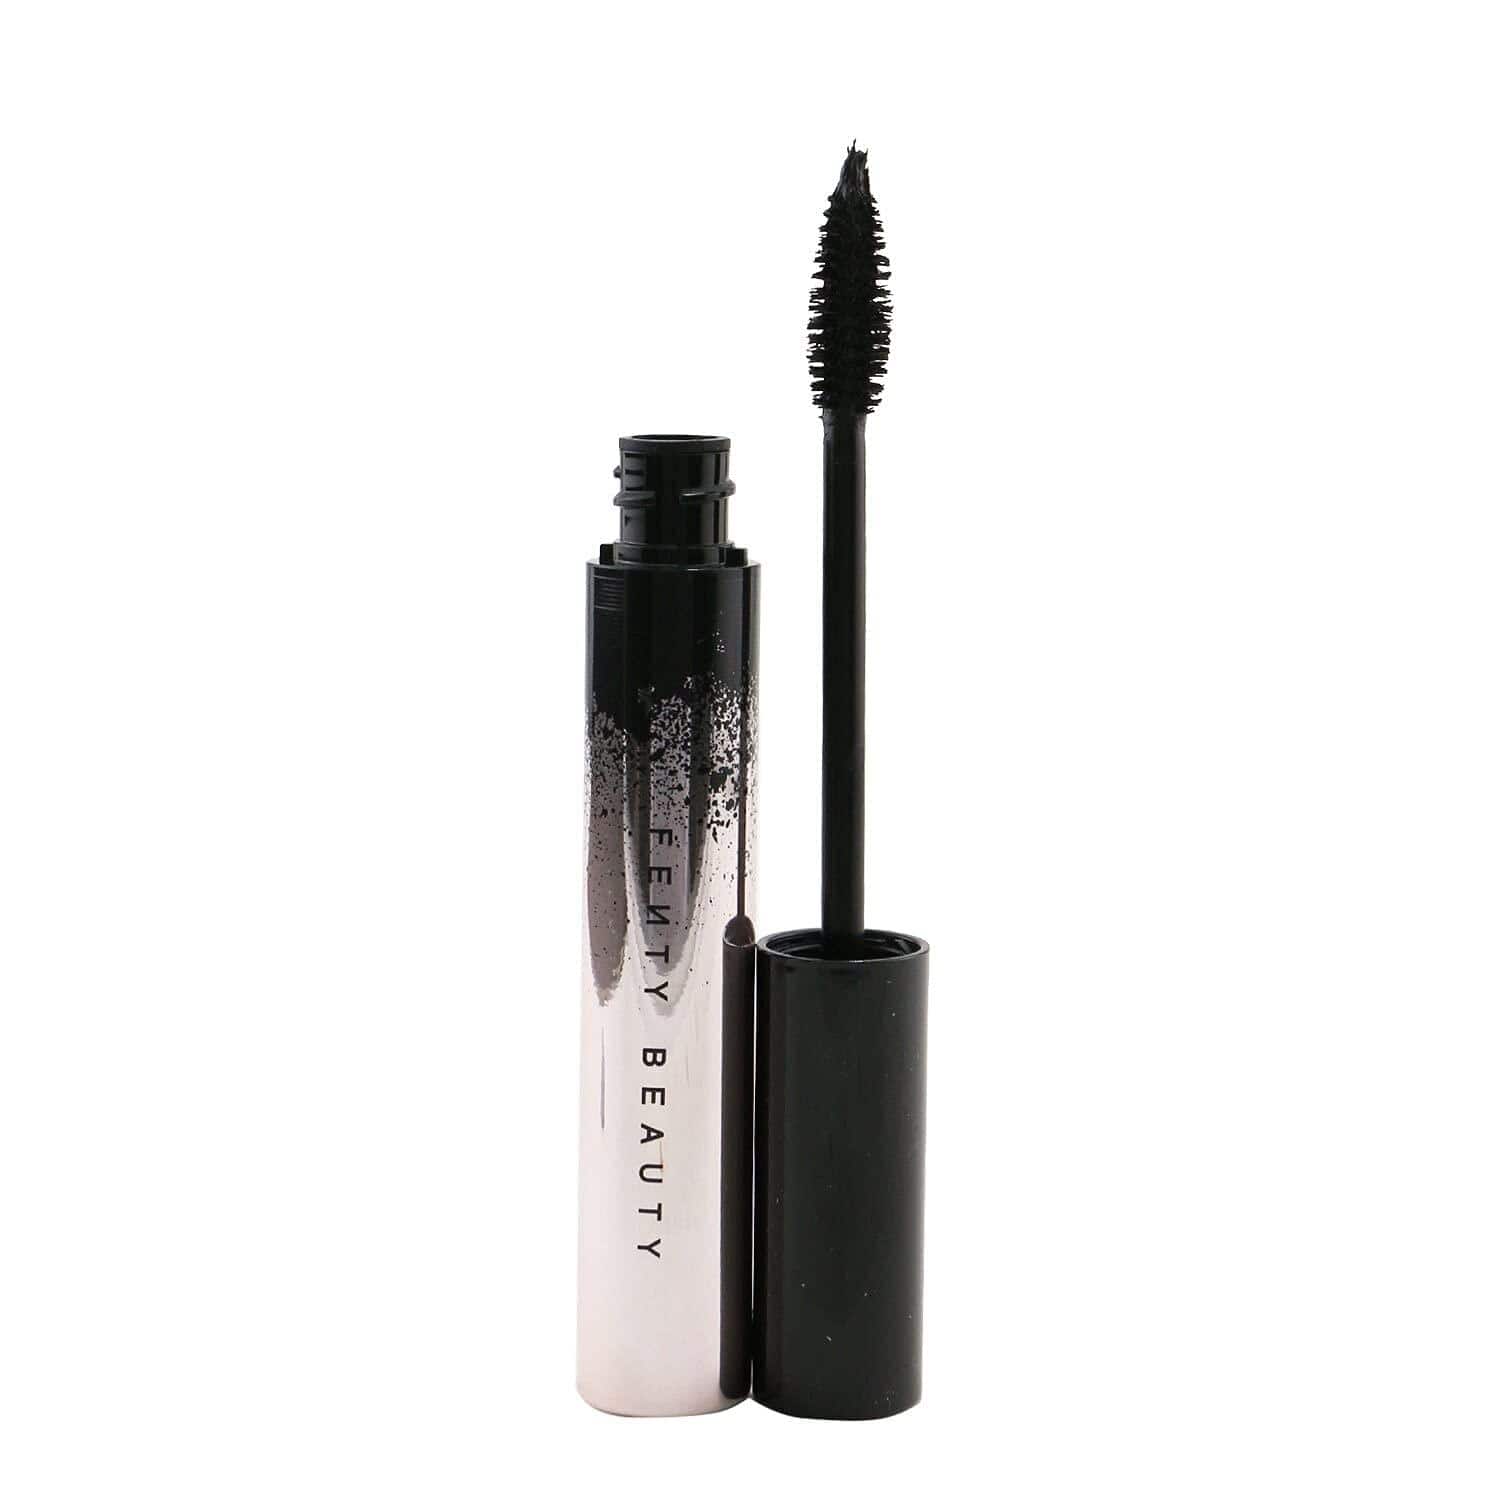 Fenty Beauty's mascara with its unique wand is my go-to for achieving volume, lift, and curl. Water-resistant and featuring a flat/fat wand design, it stands out in my collection of volumizing mascaras.